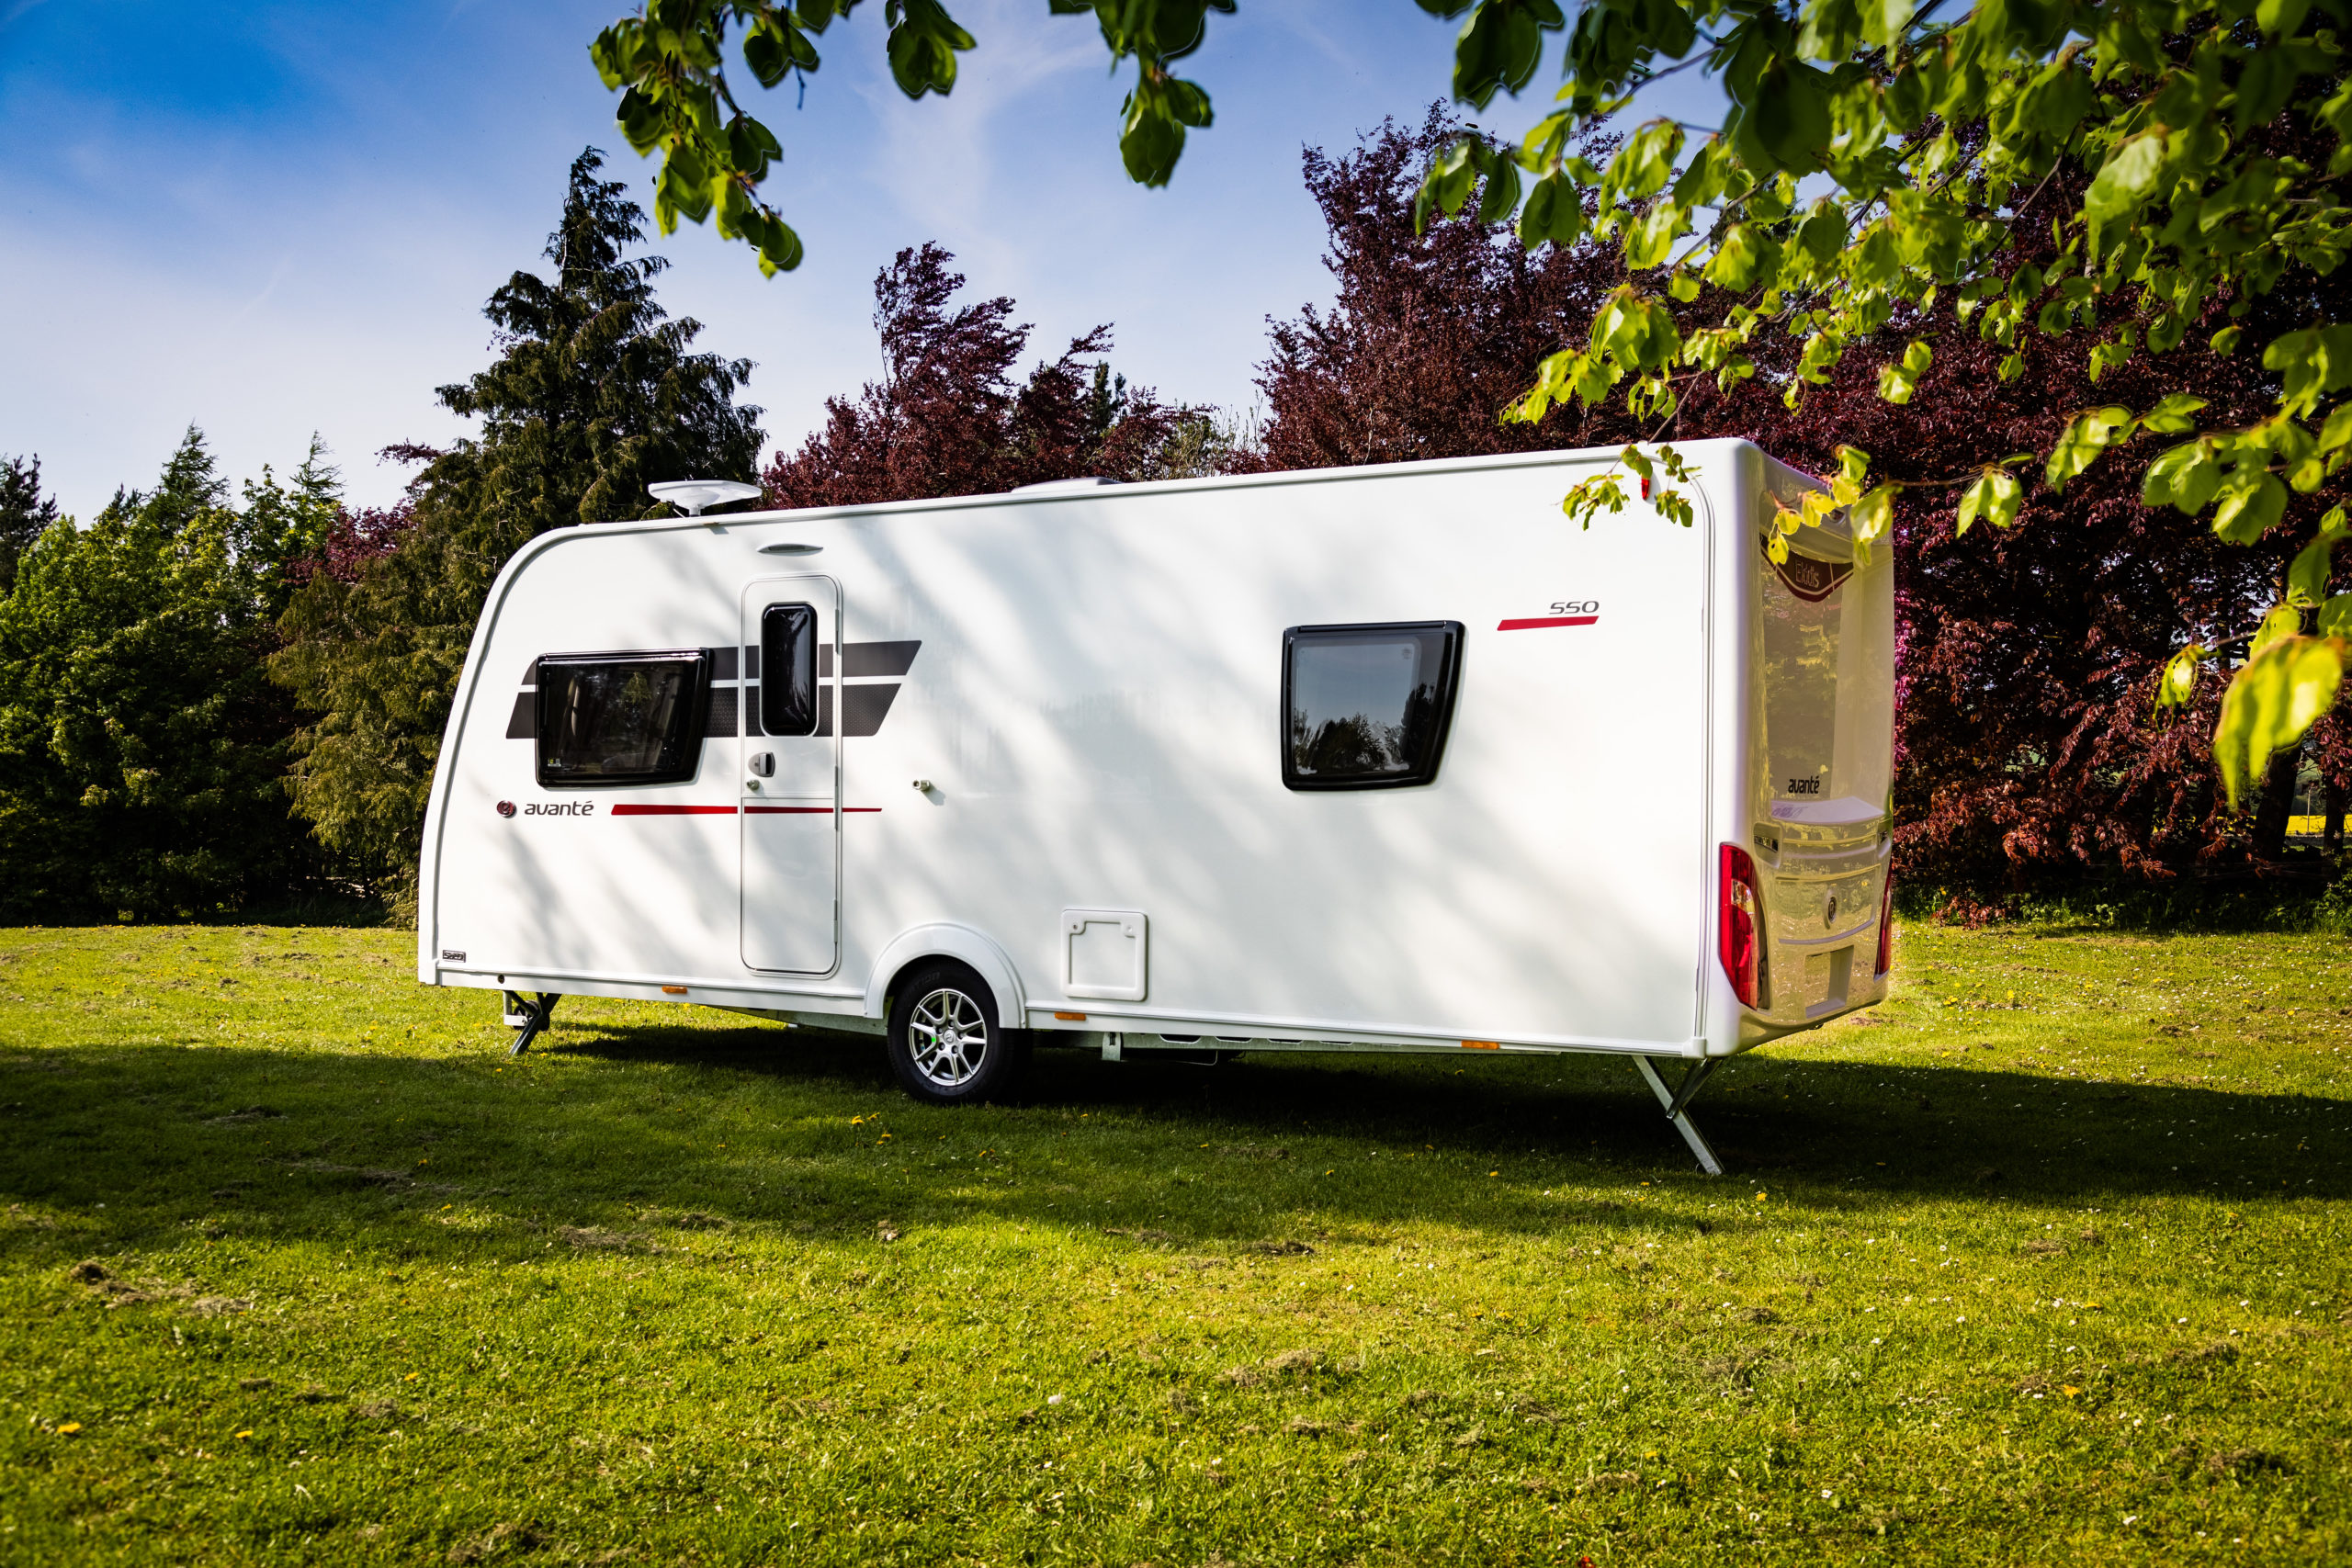 Motorhomes can now park overnight at some forest carparks.